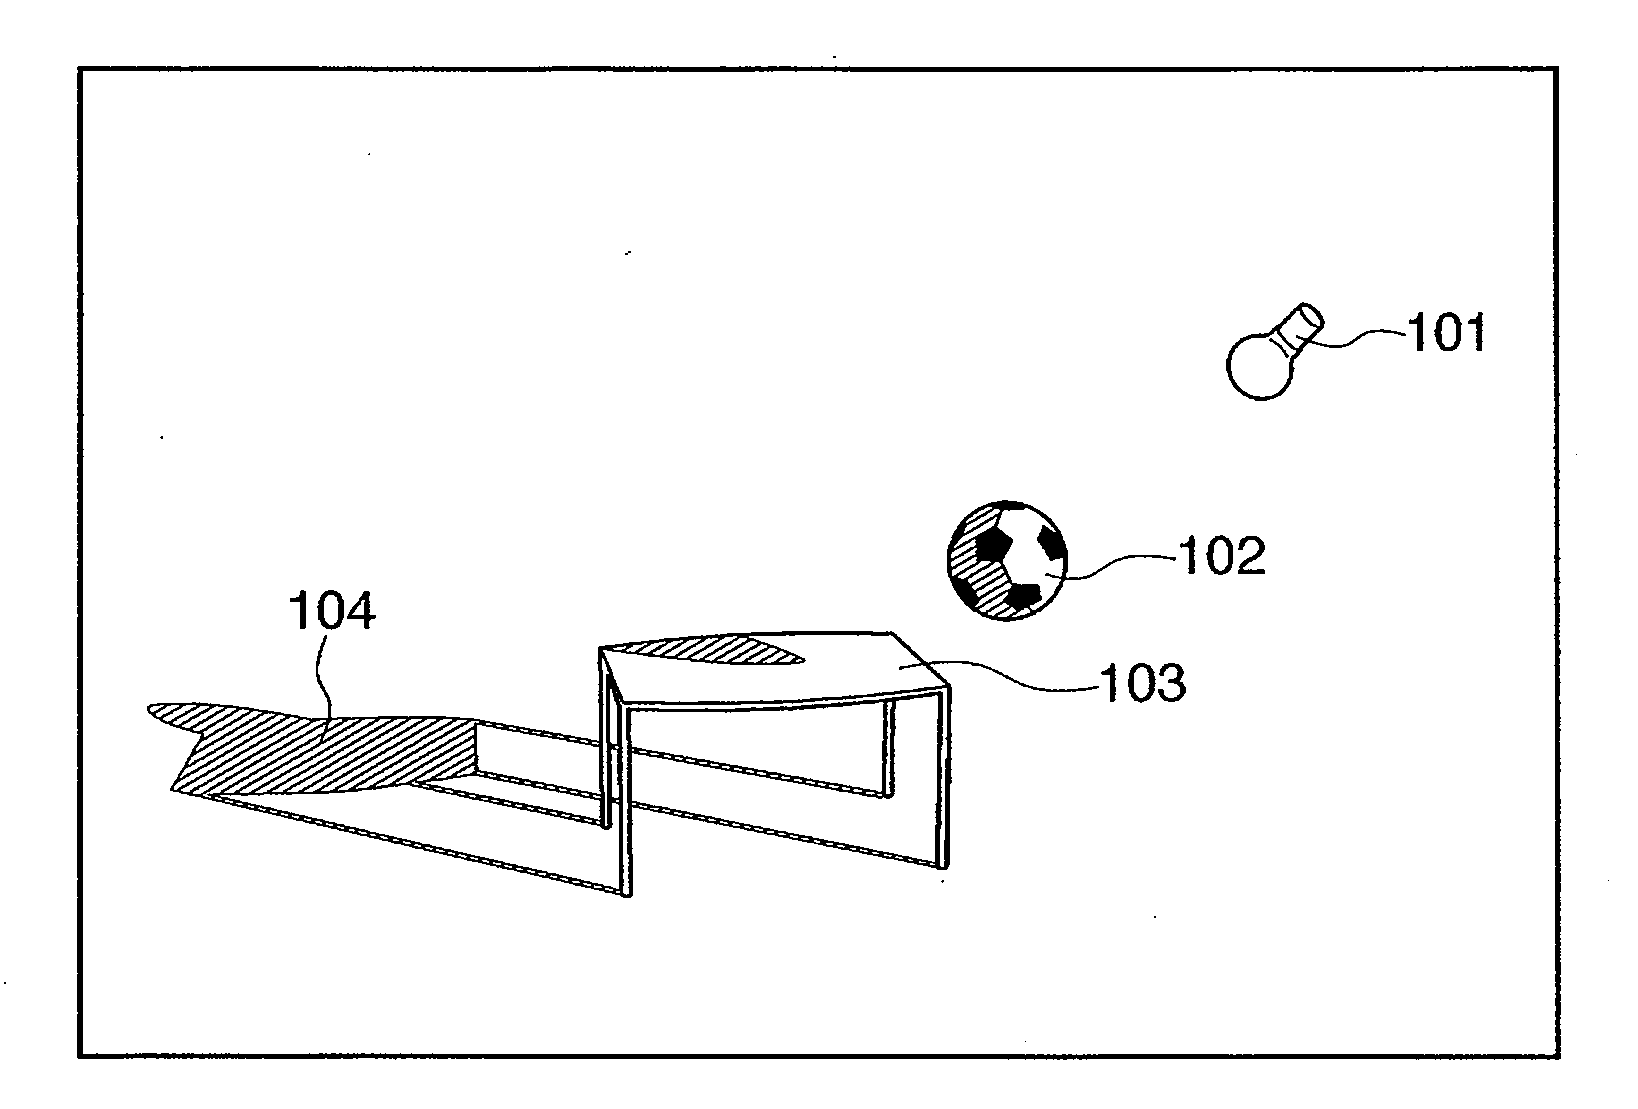 Image processing apparatus and method of controlling operation of same